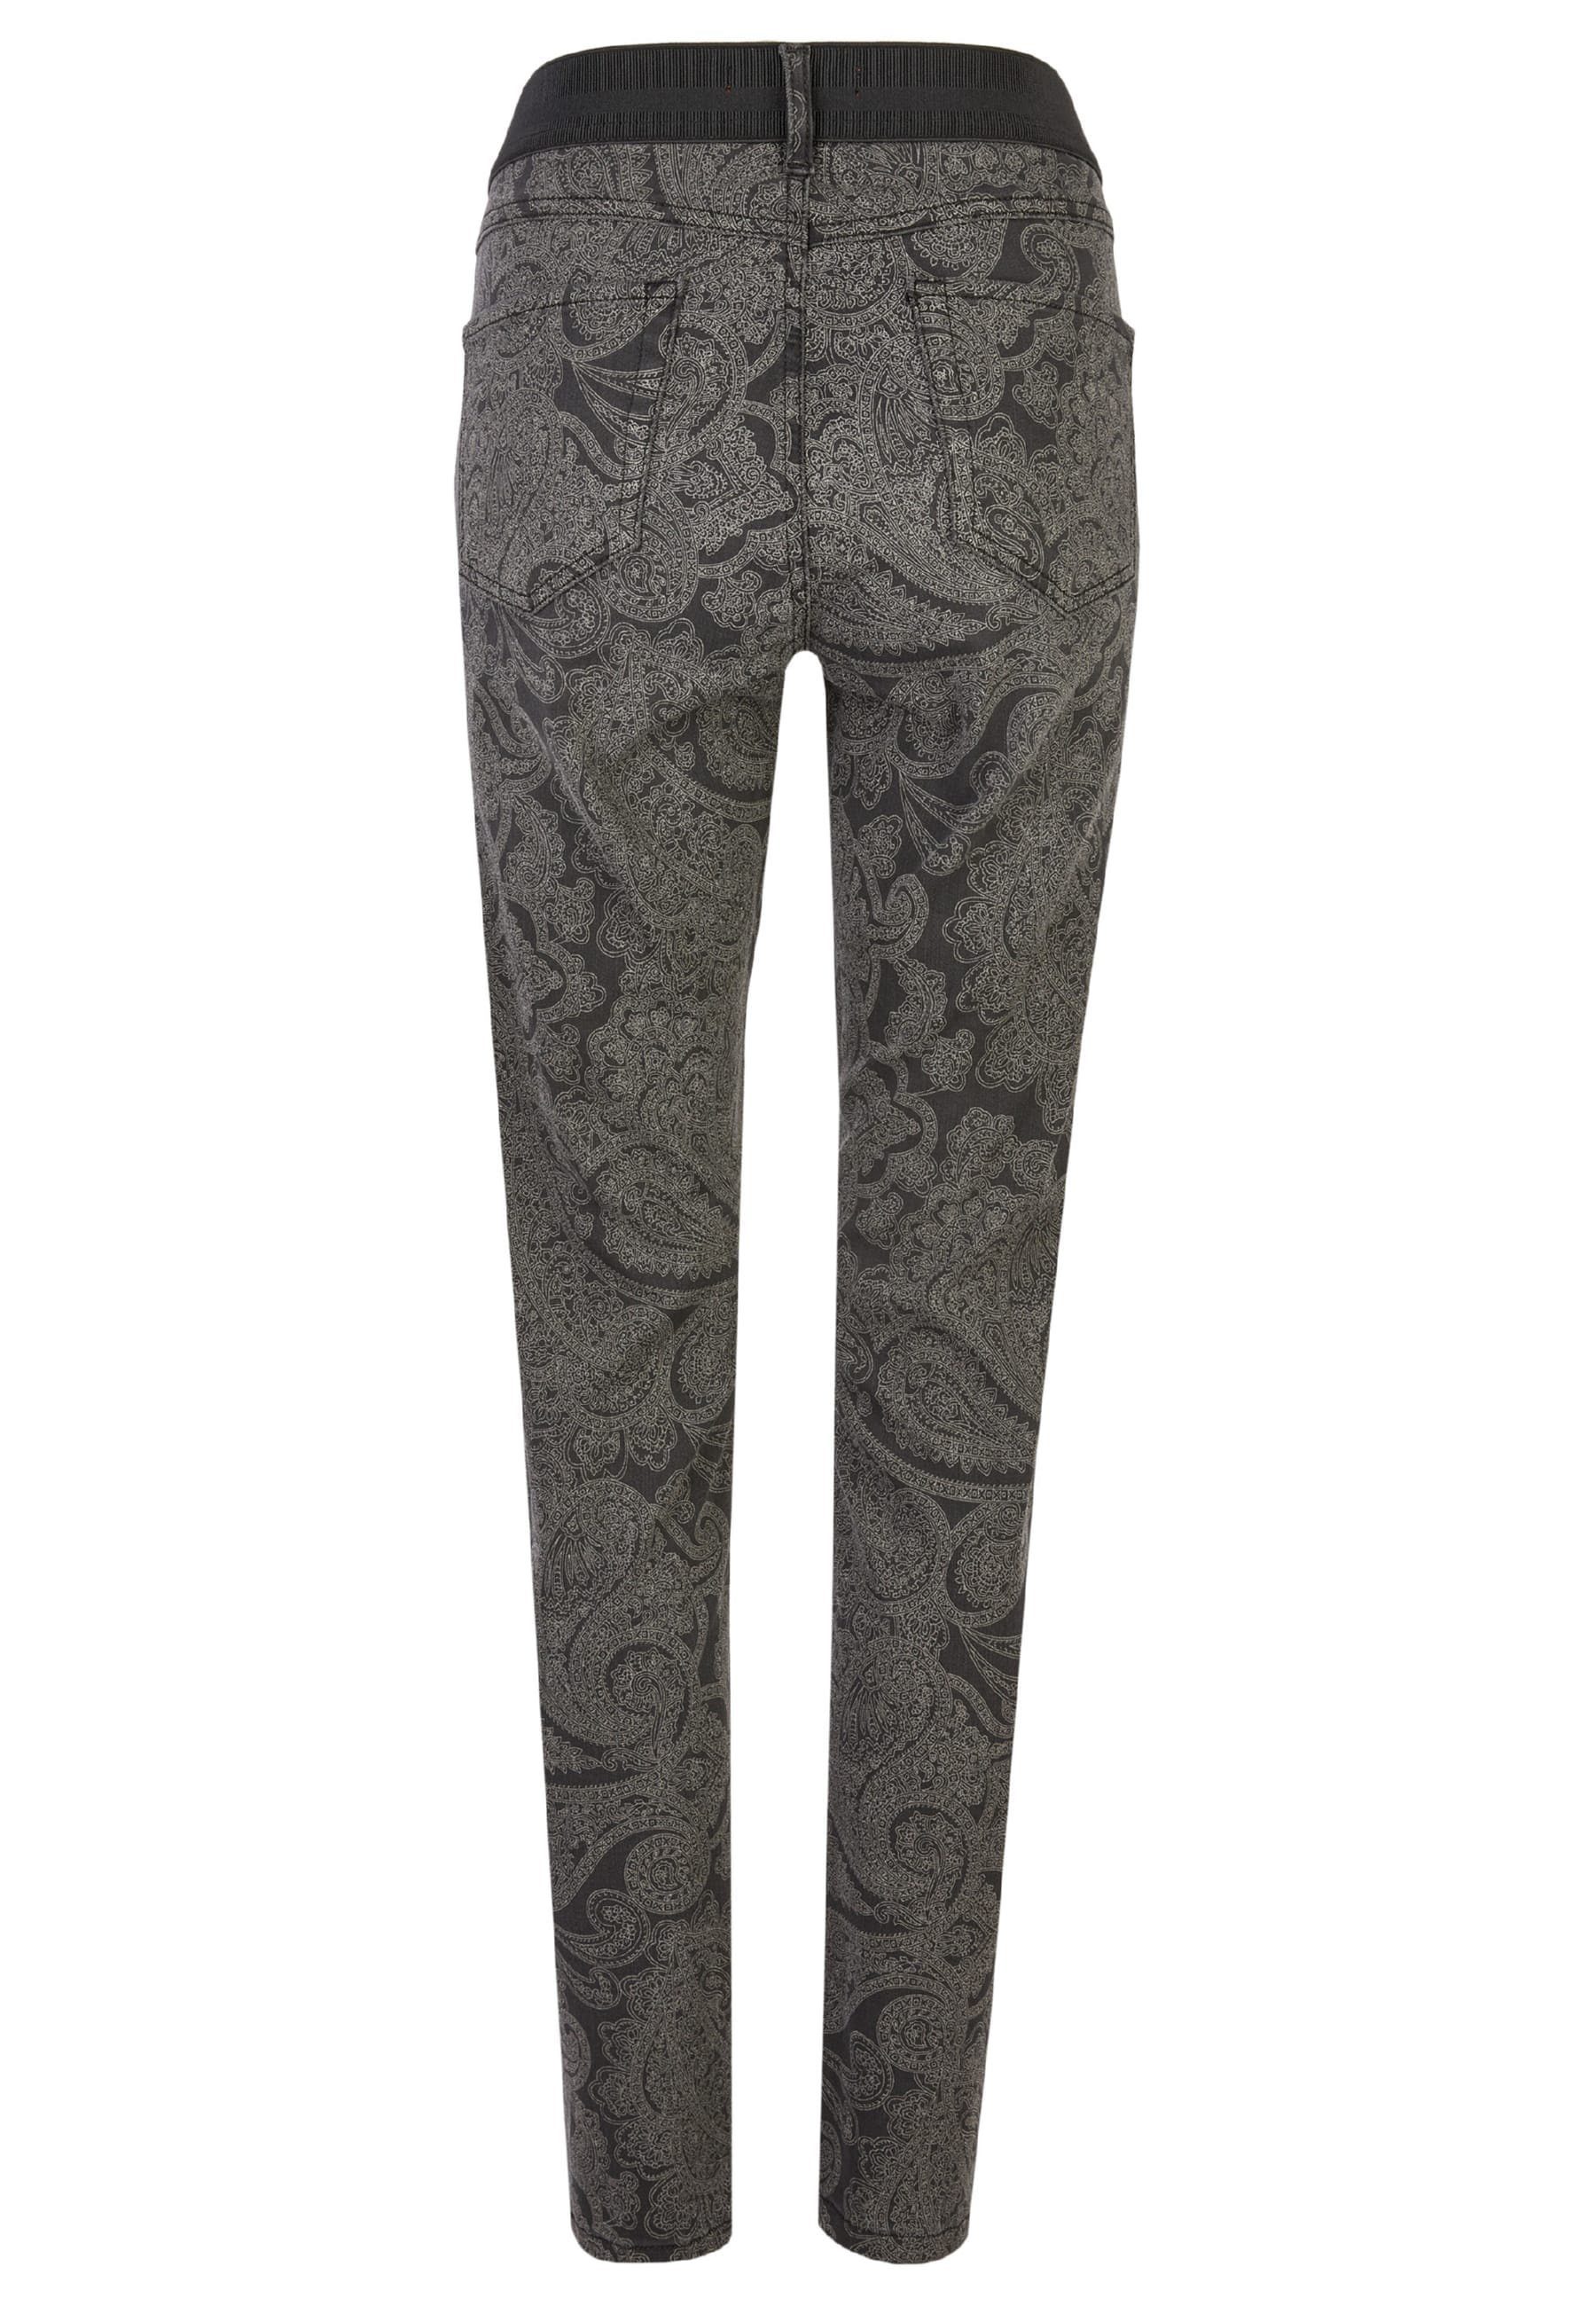 ANGELS Slim-fit-Jeans Jeans One Size mit Label-Applikationen anthrazit Paisley-Muster mit